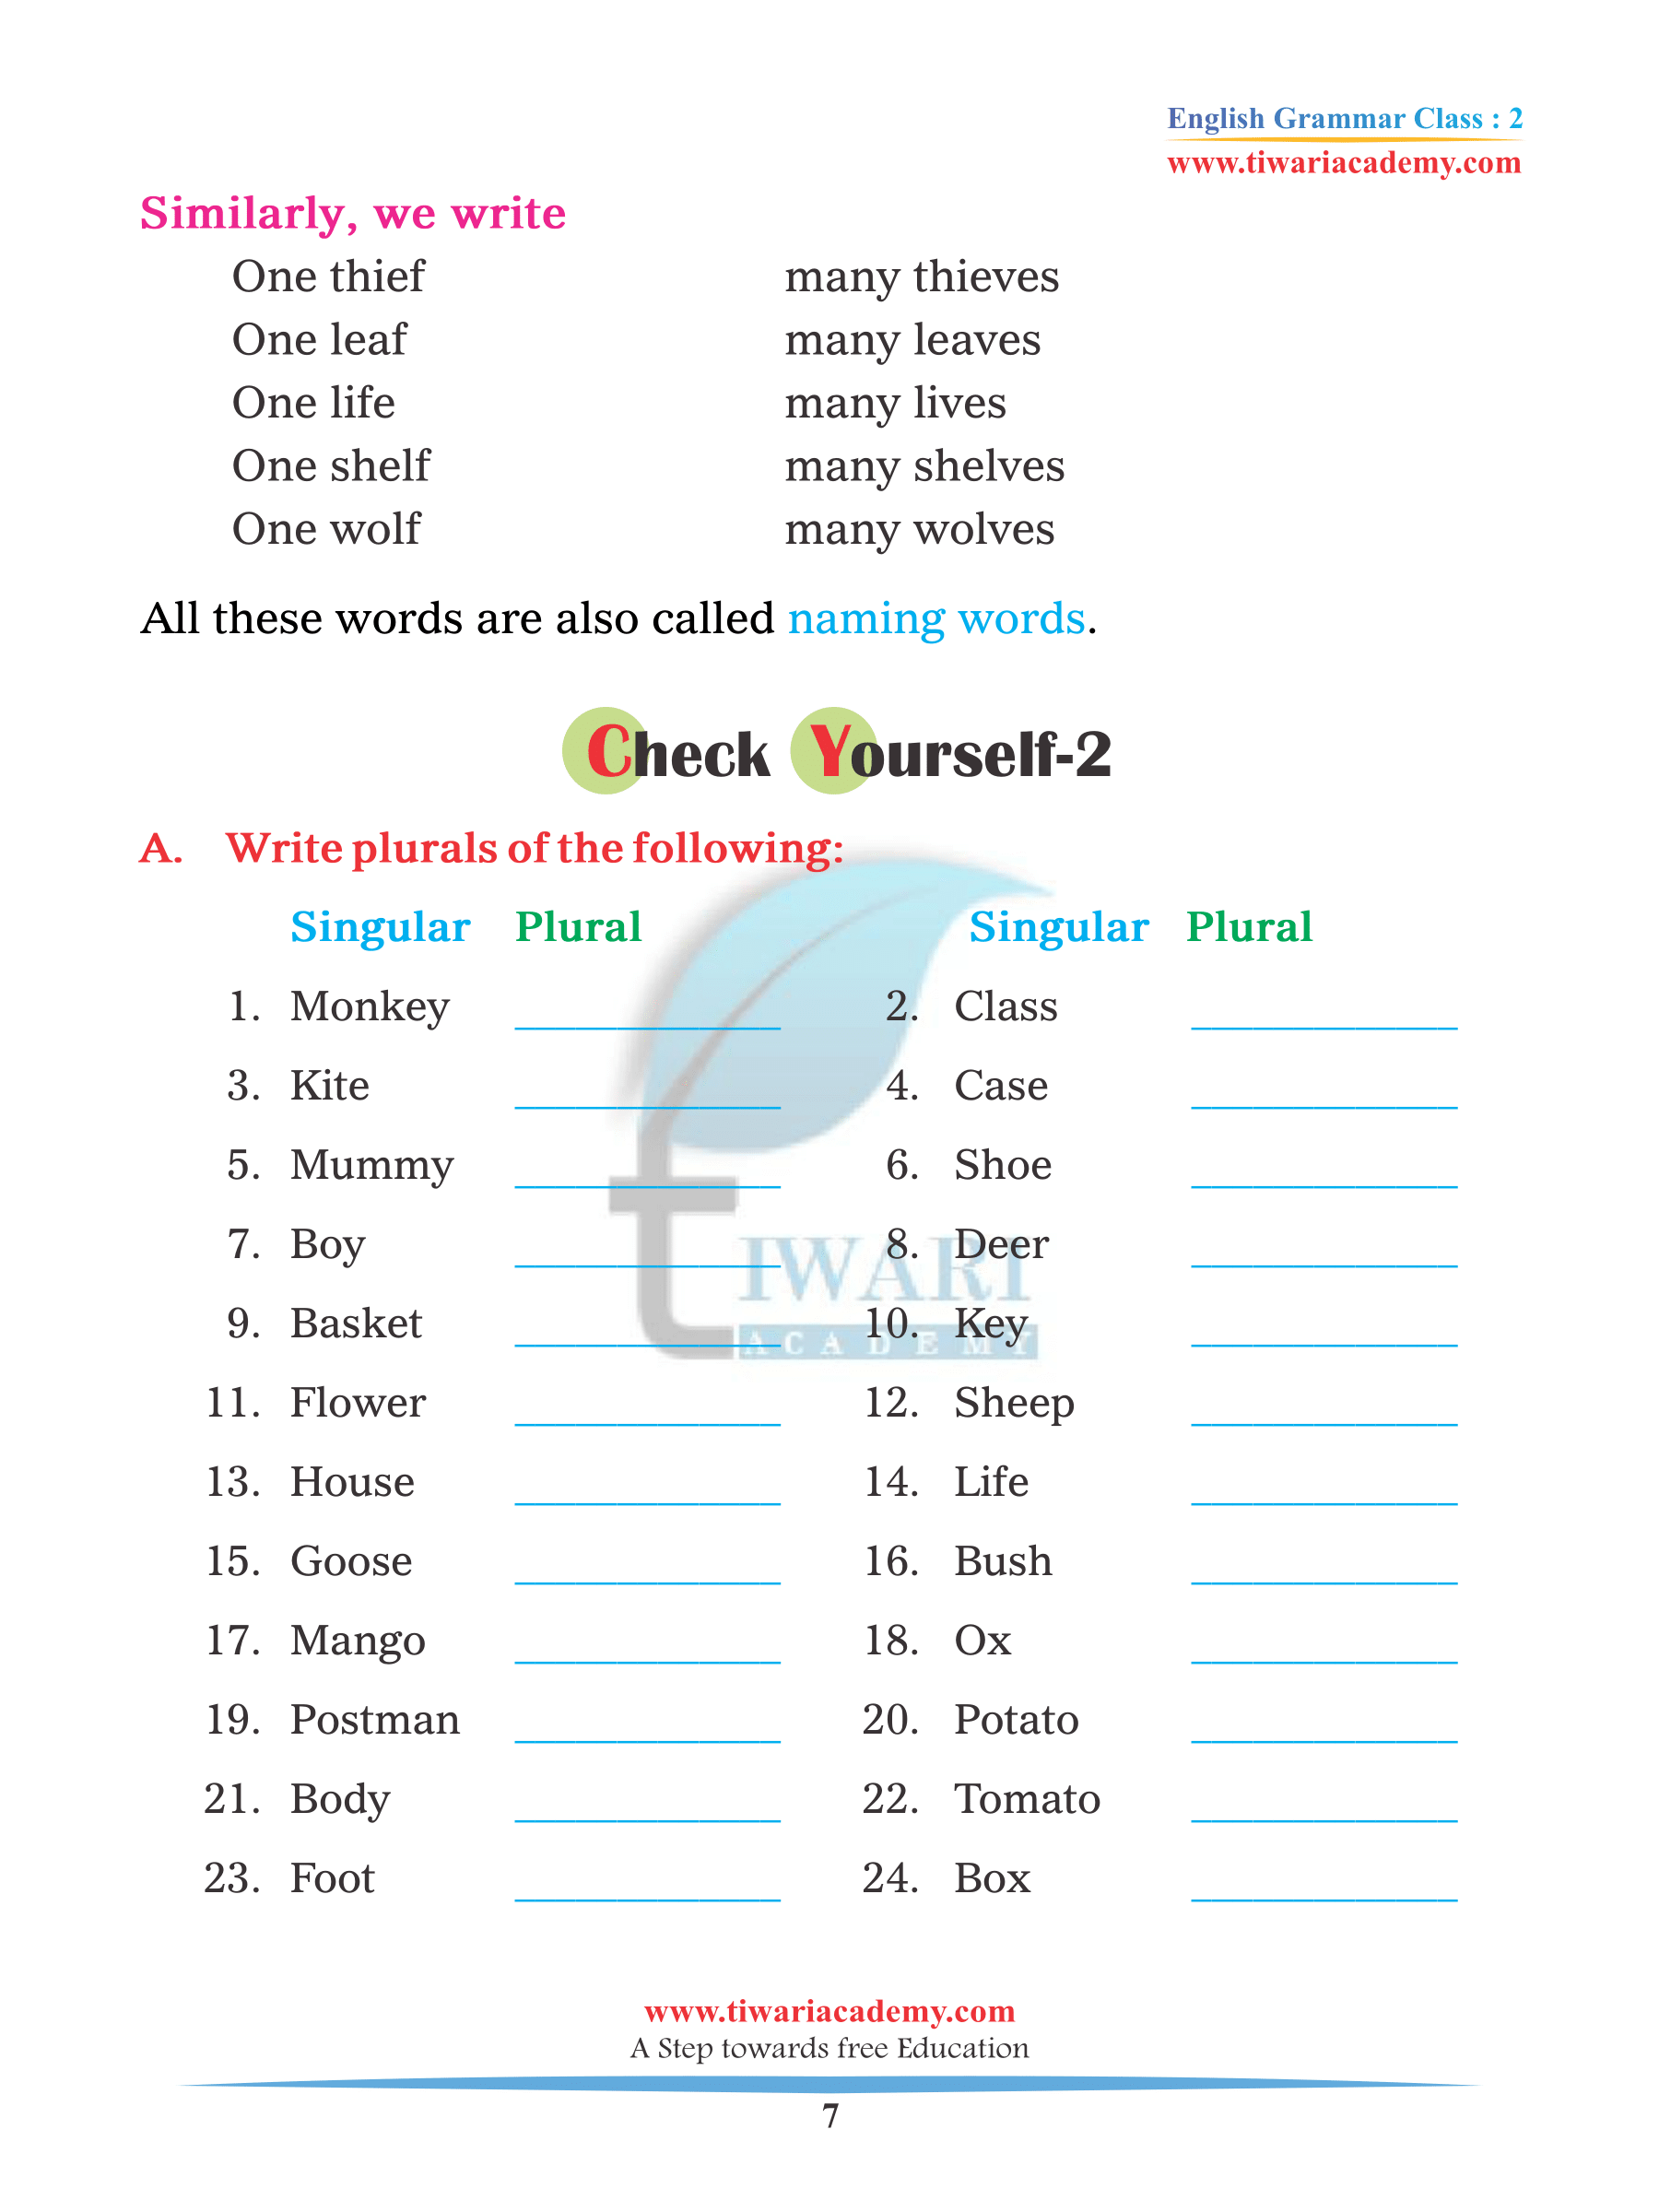 cbse-english-grammar-exercises-for-class-2-english-worksheets-class-2